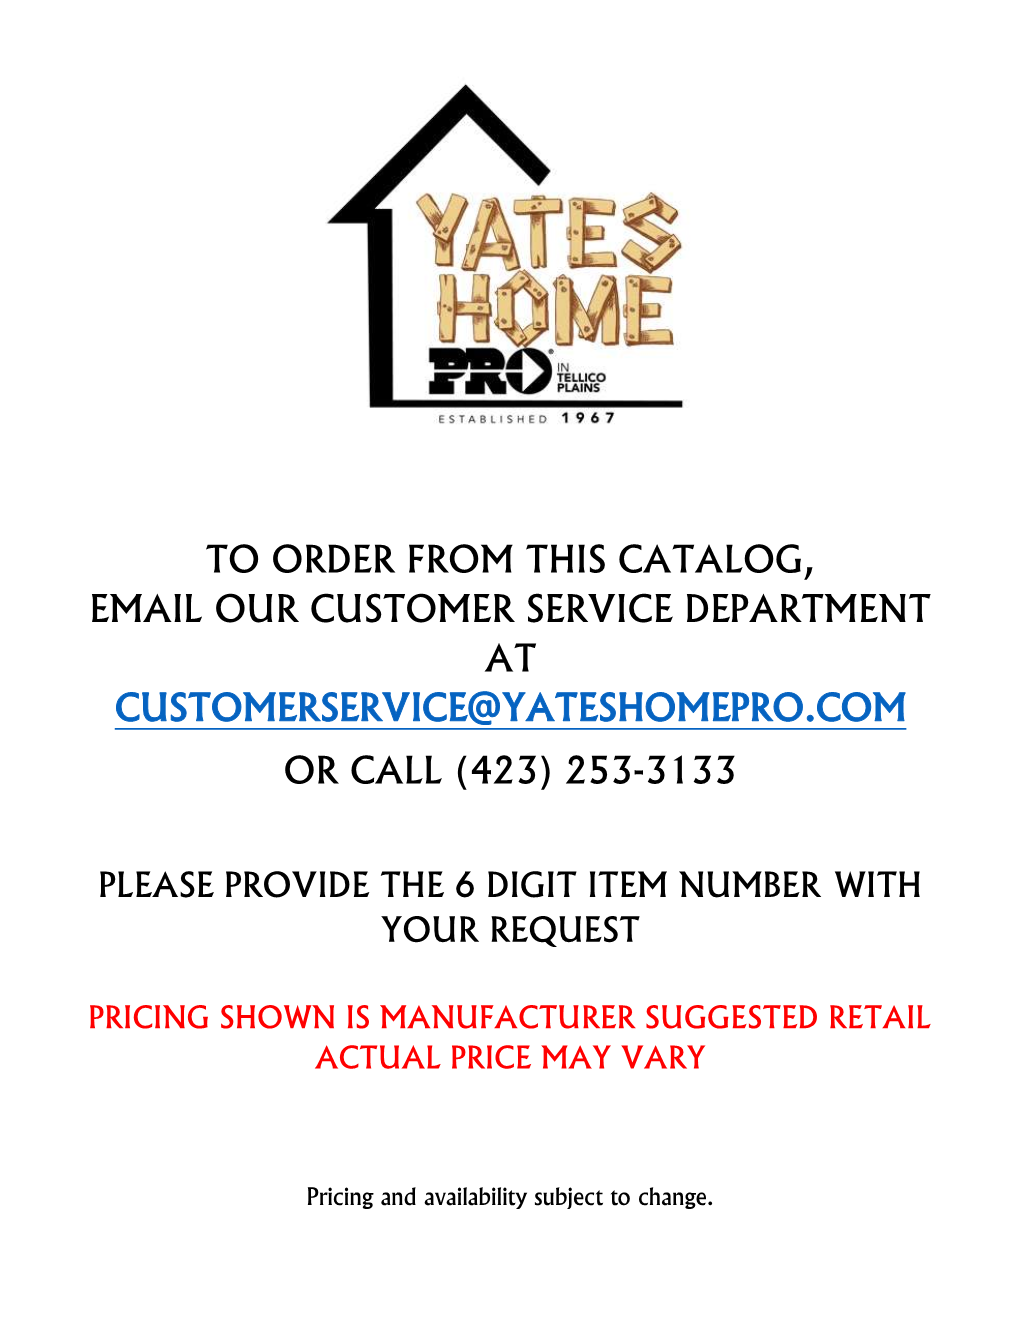 To Order from This Catalog, Email Our Customer Service Department at Customerservice@Yateshomepro.Com Or Call (423) 253-3133